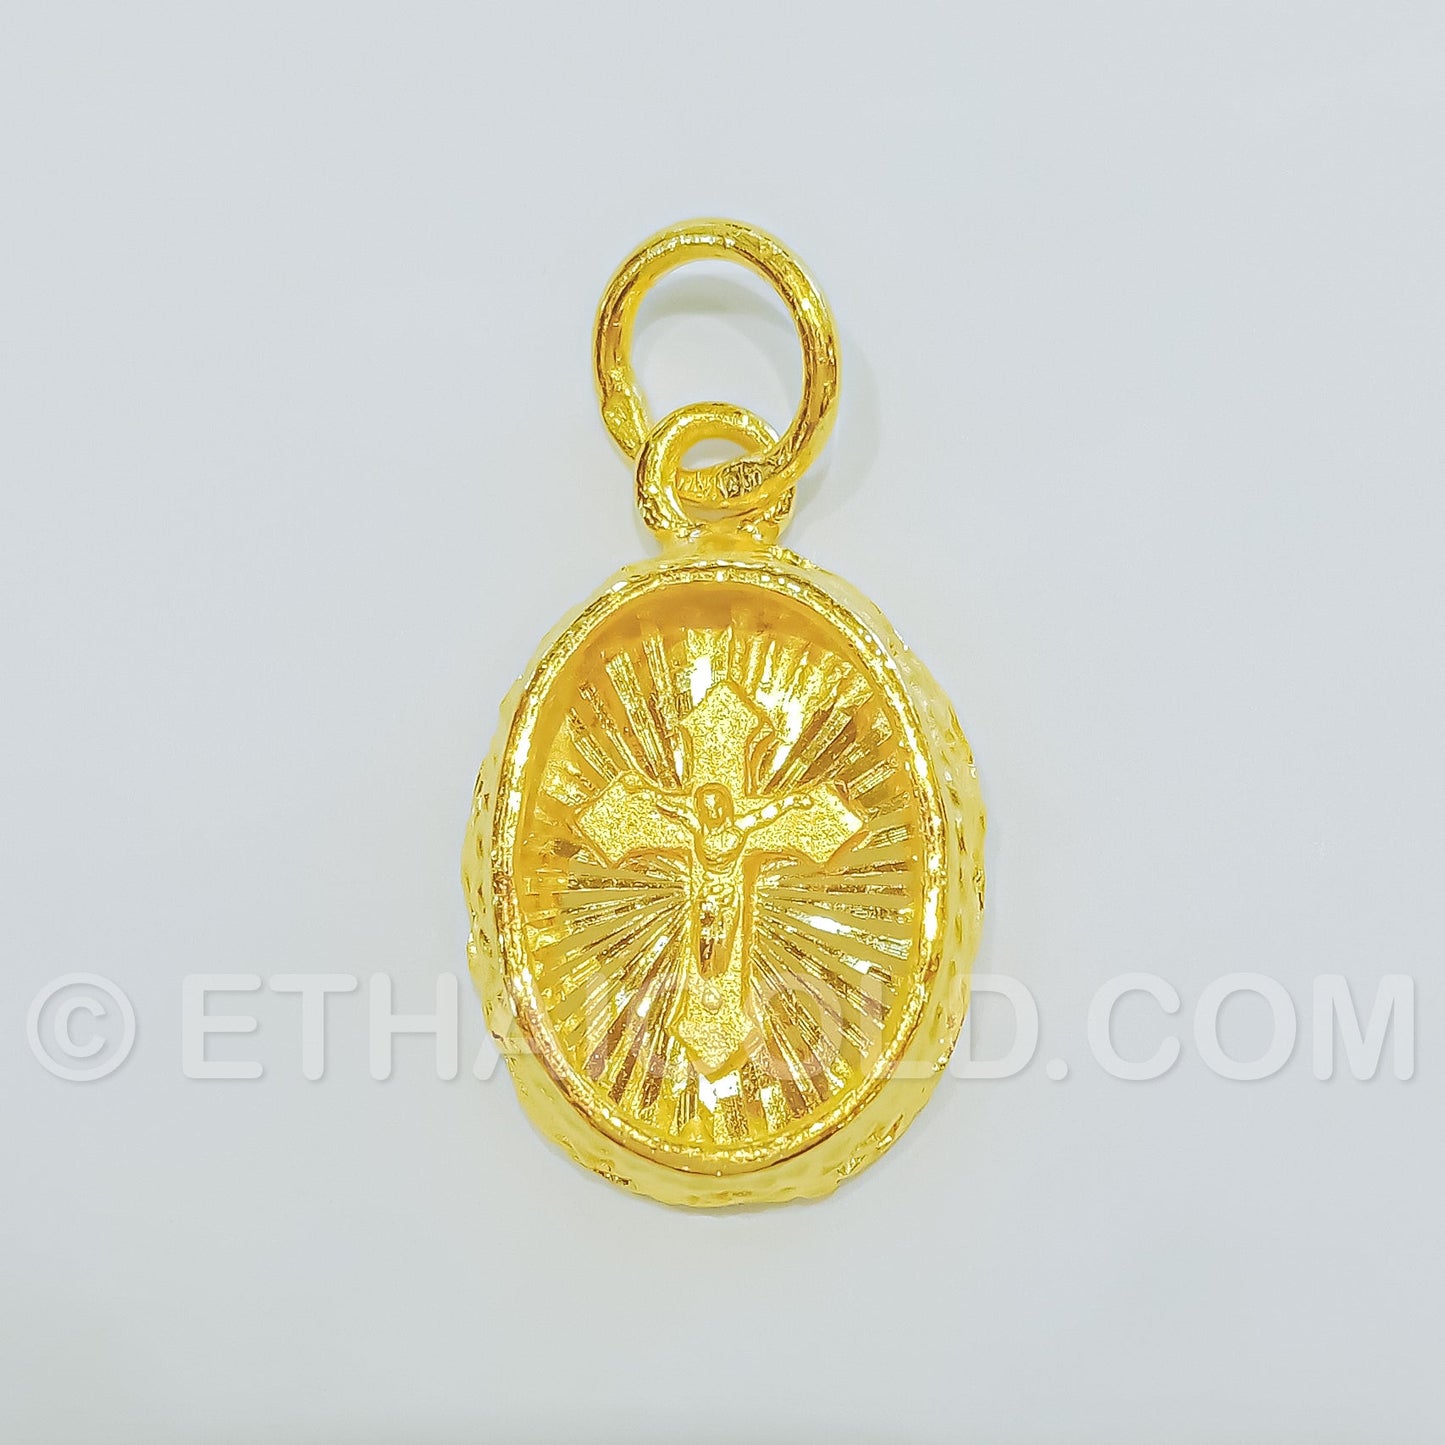 1/2 BAHT POLISHED MATTE DIAMOND-CUT SOLID OVAL-CASE CRUCIFIX CHRISTIAN PENDANT IN 23K GOLD (ID: P0502S)